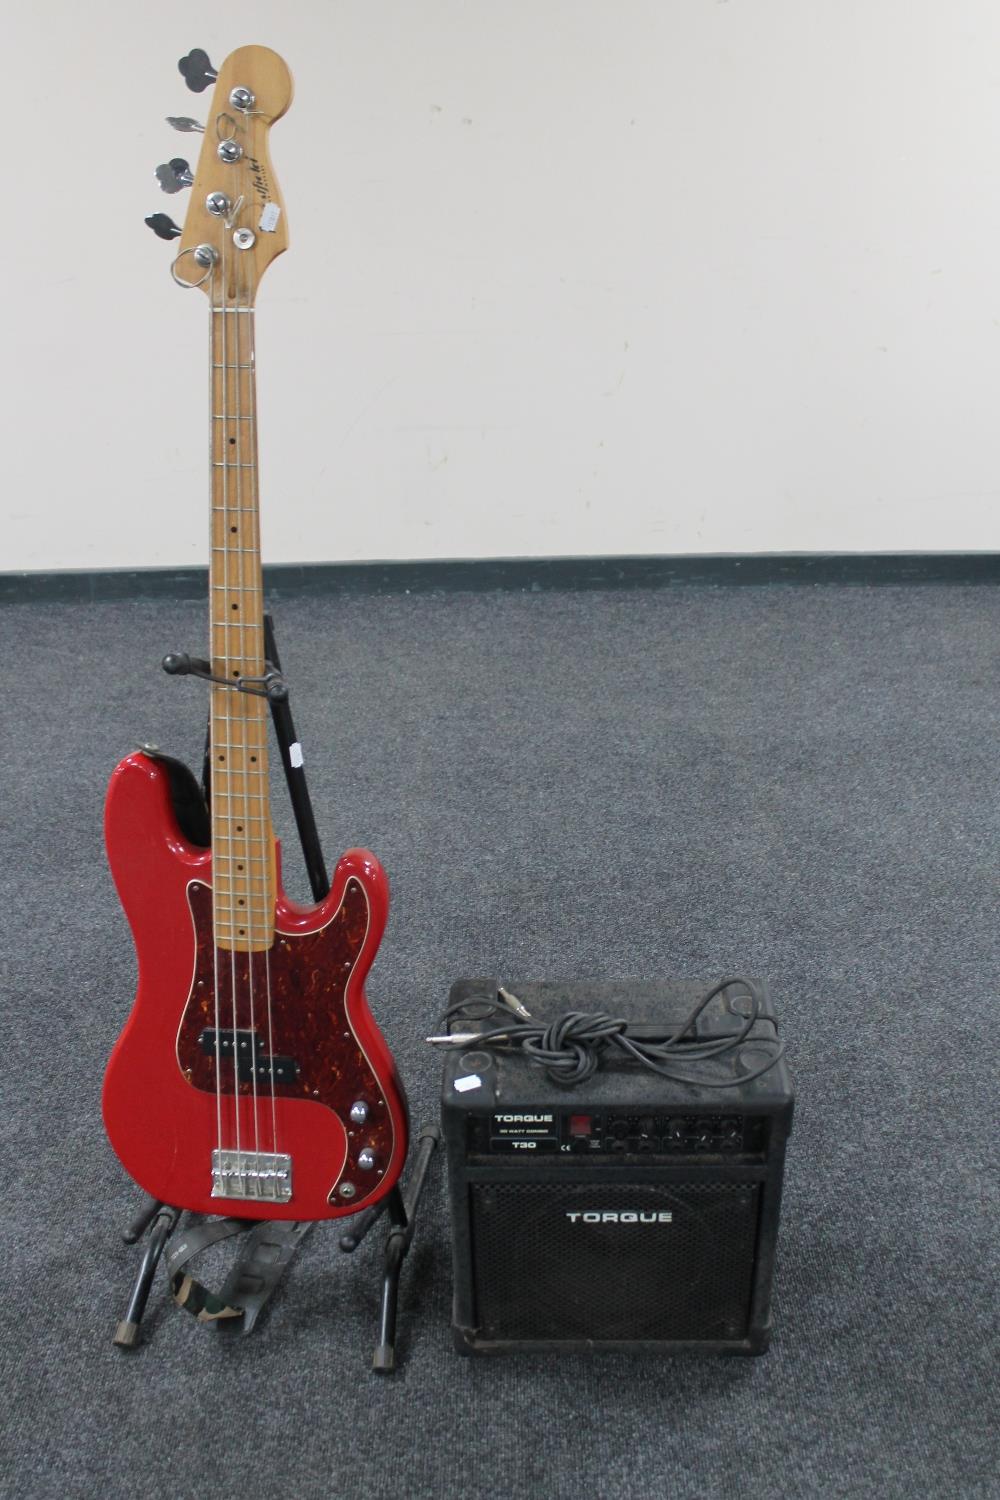 A Westfield bass guitar on stand with a Torque T30 amplifier